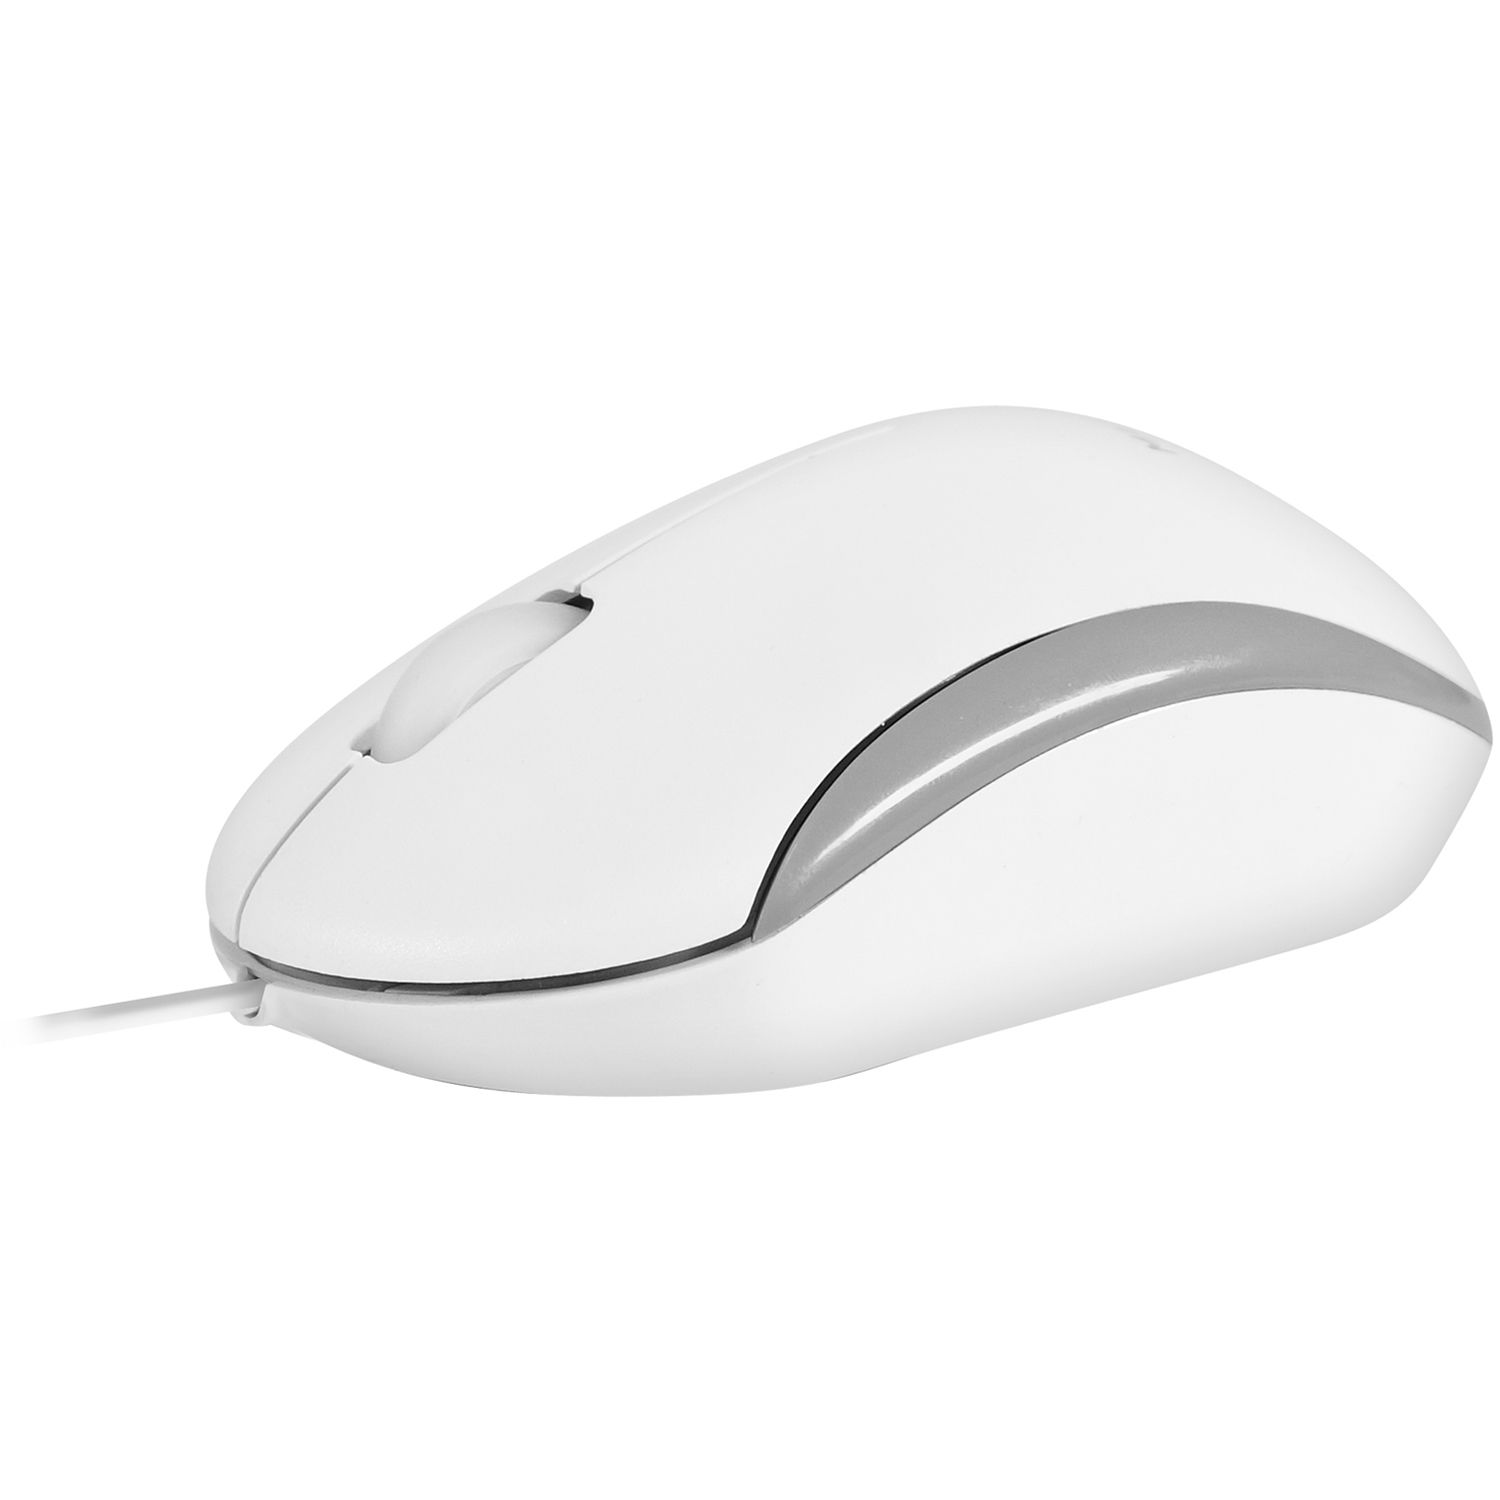 optical mouse for pc